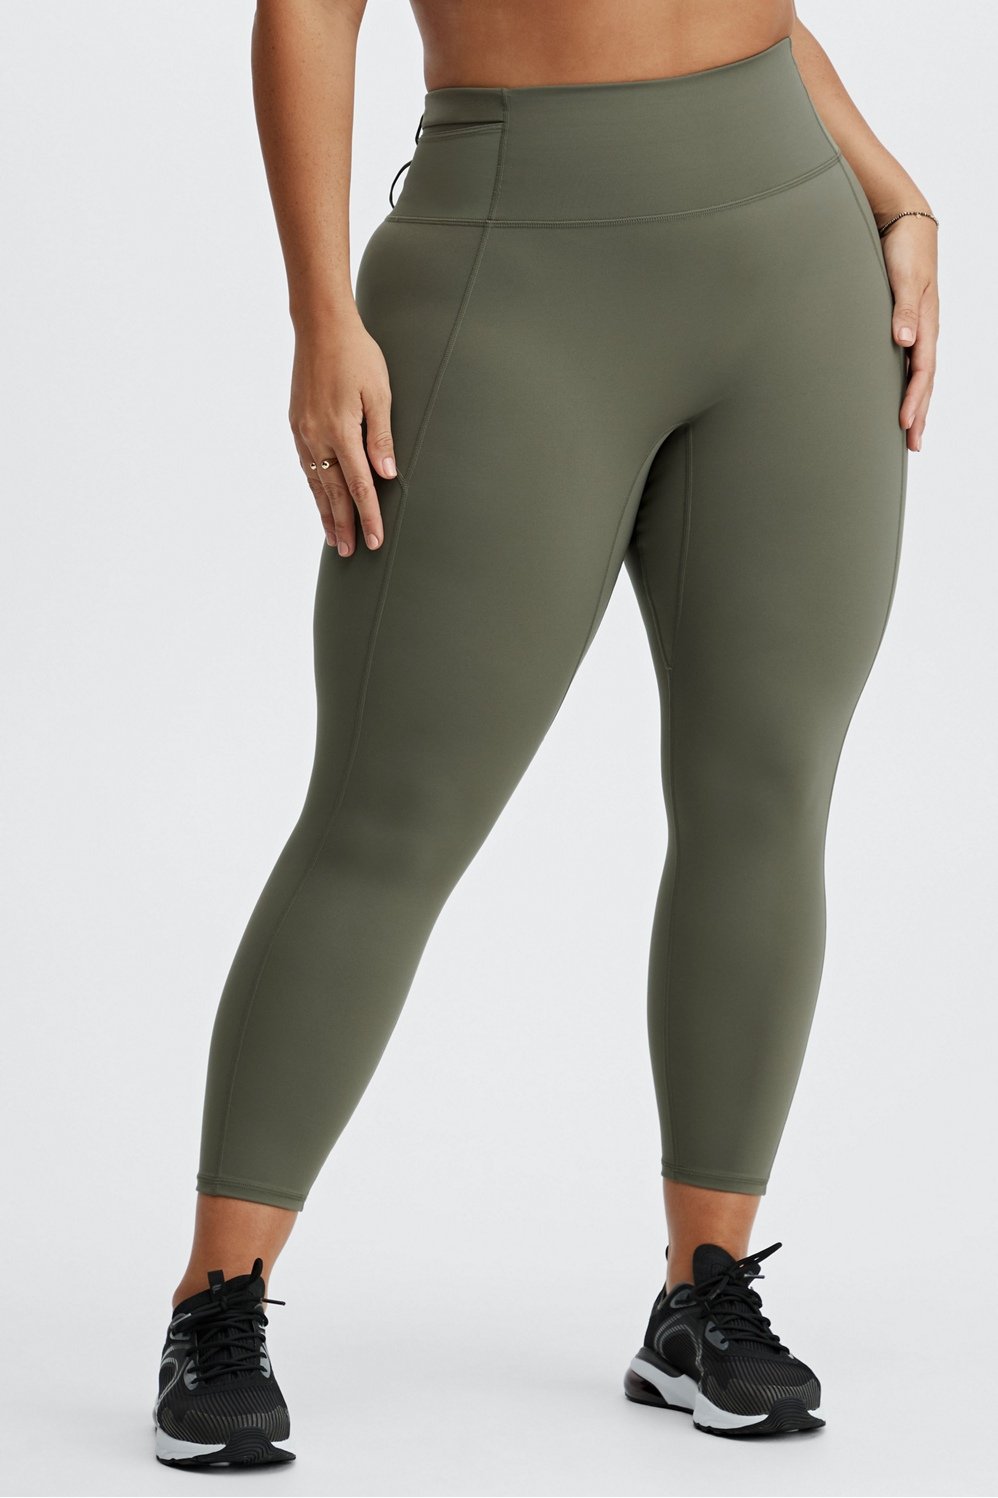 All in motion Women's Legging 7/8 High Rise Sculpted perf Size M Olive  green 